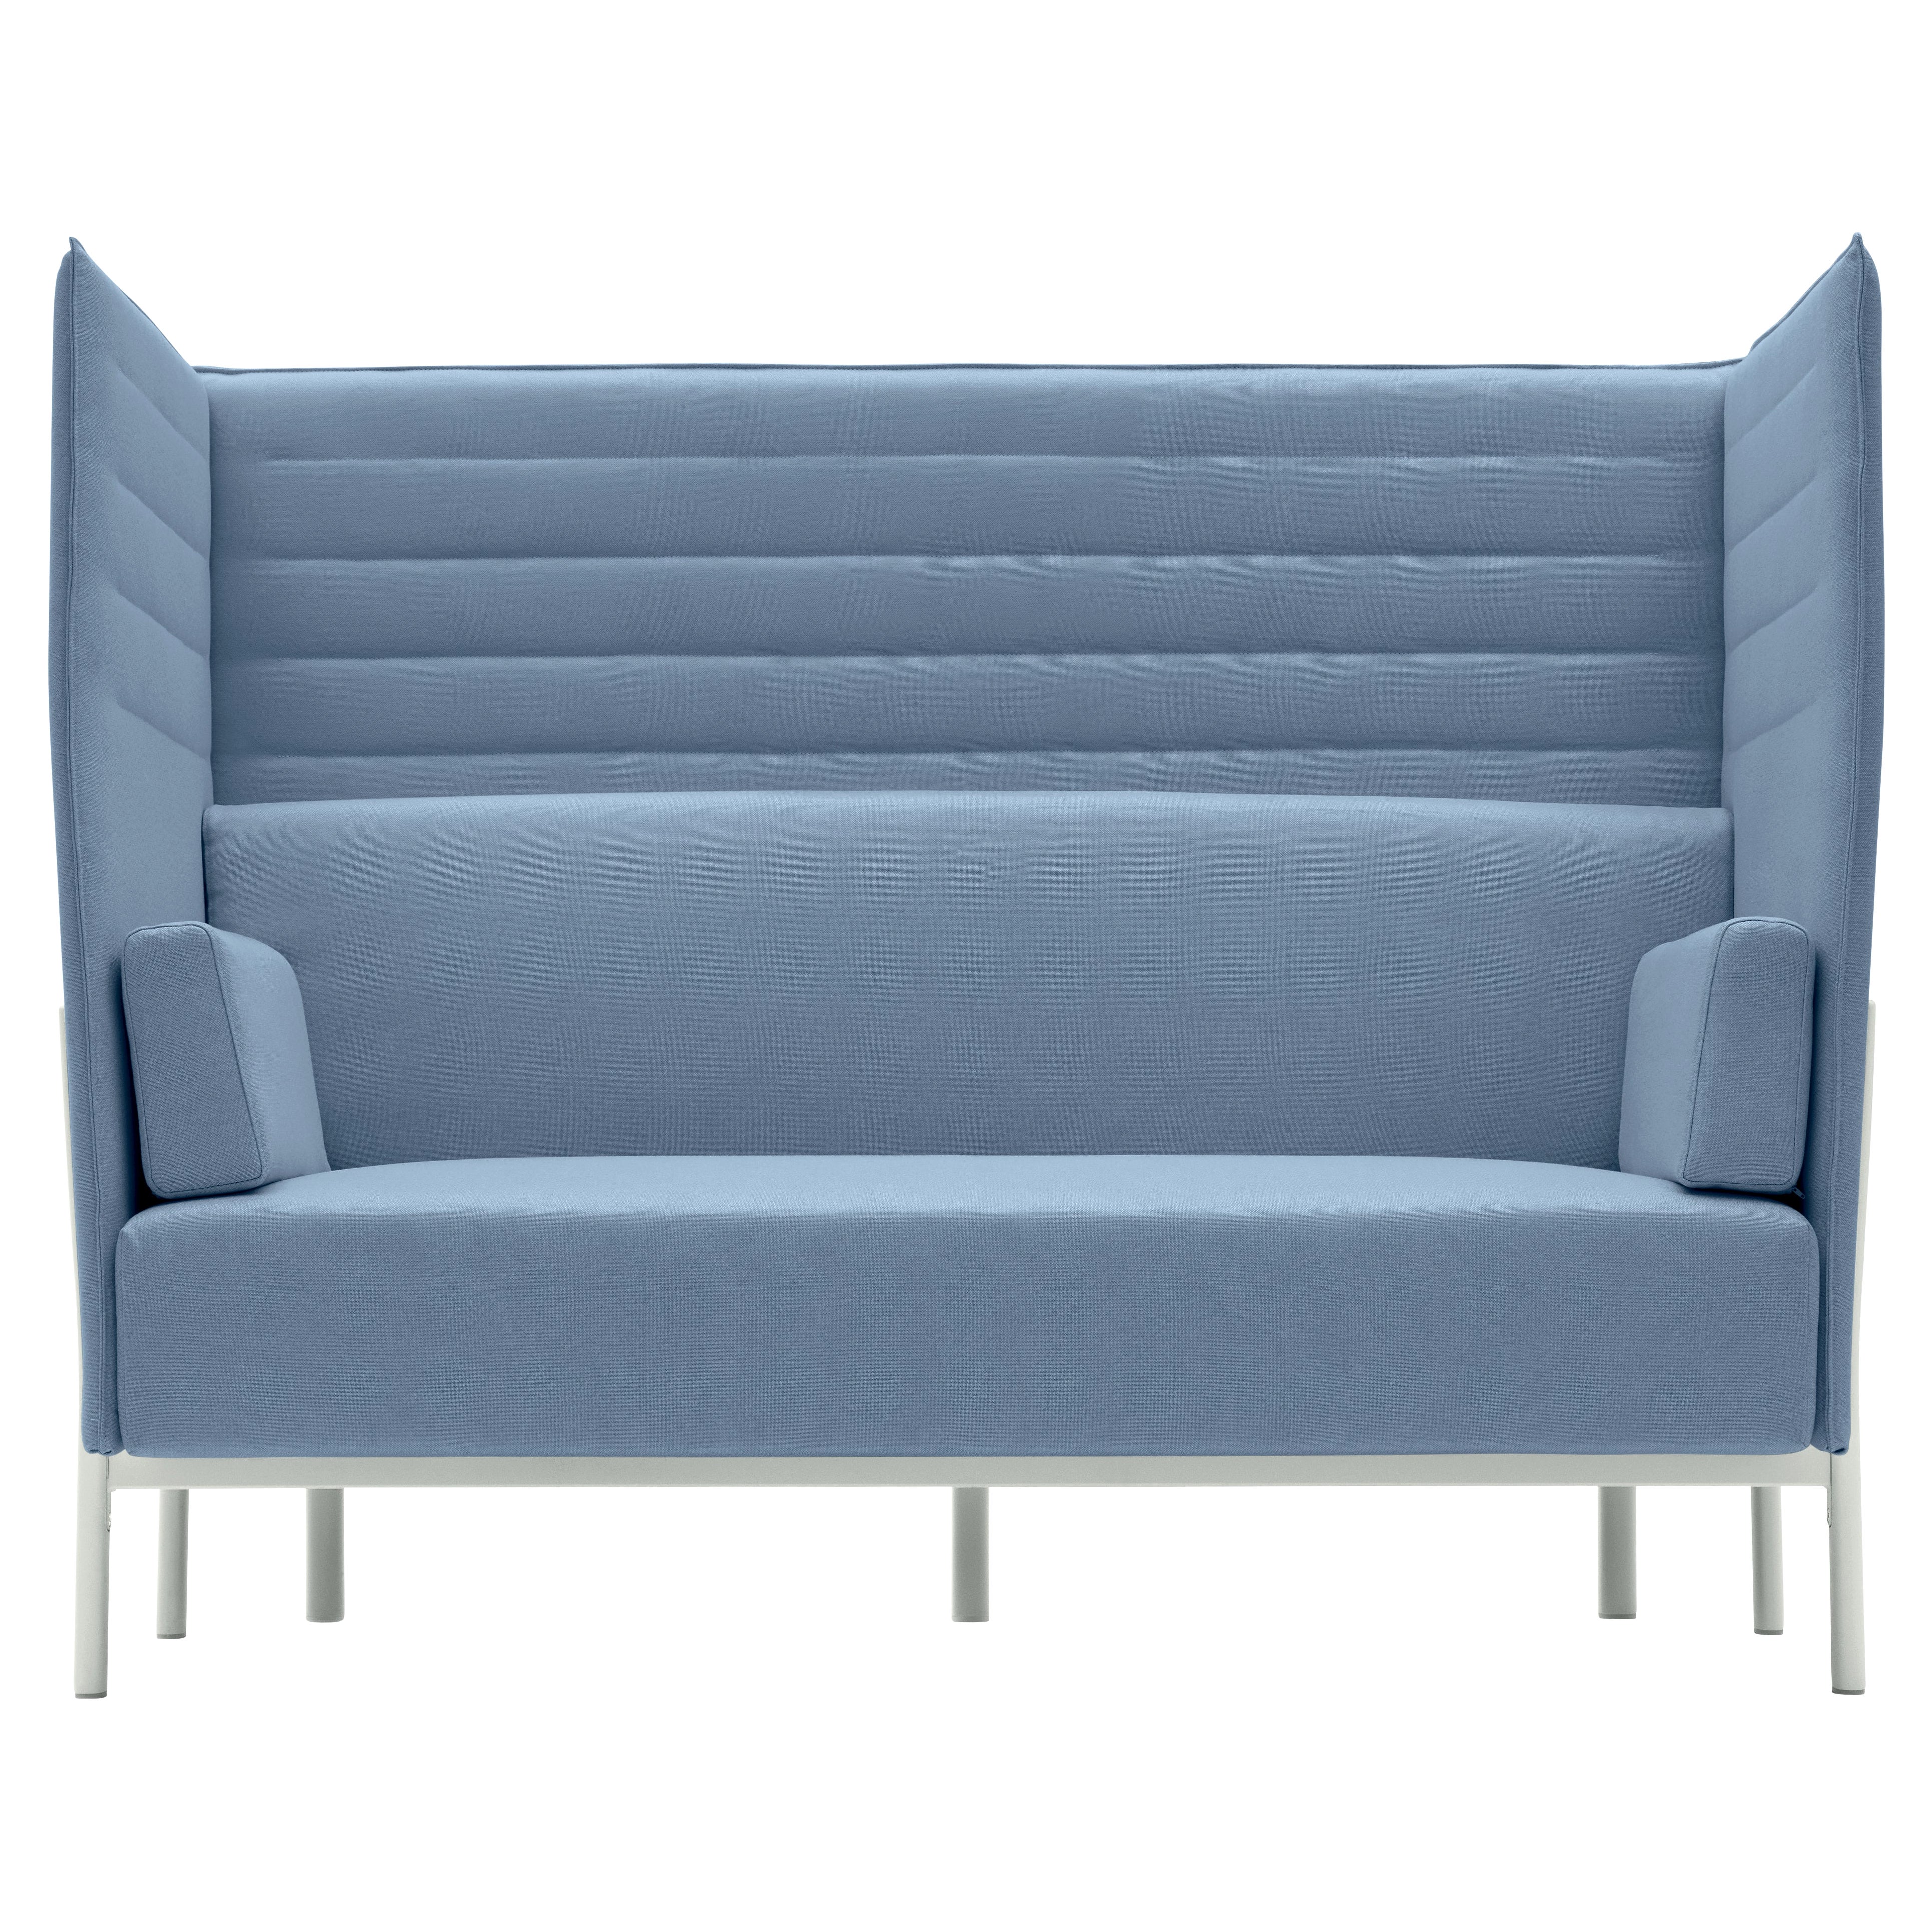 Alias 863 Eleven High Back 2 Seater Sofa in Blue &White Lacquered Aluminum Frame